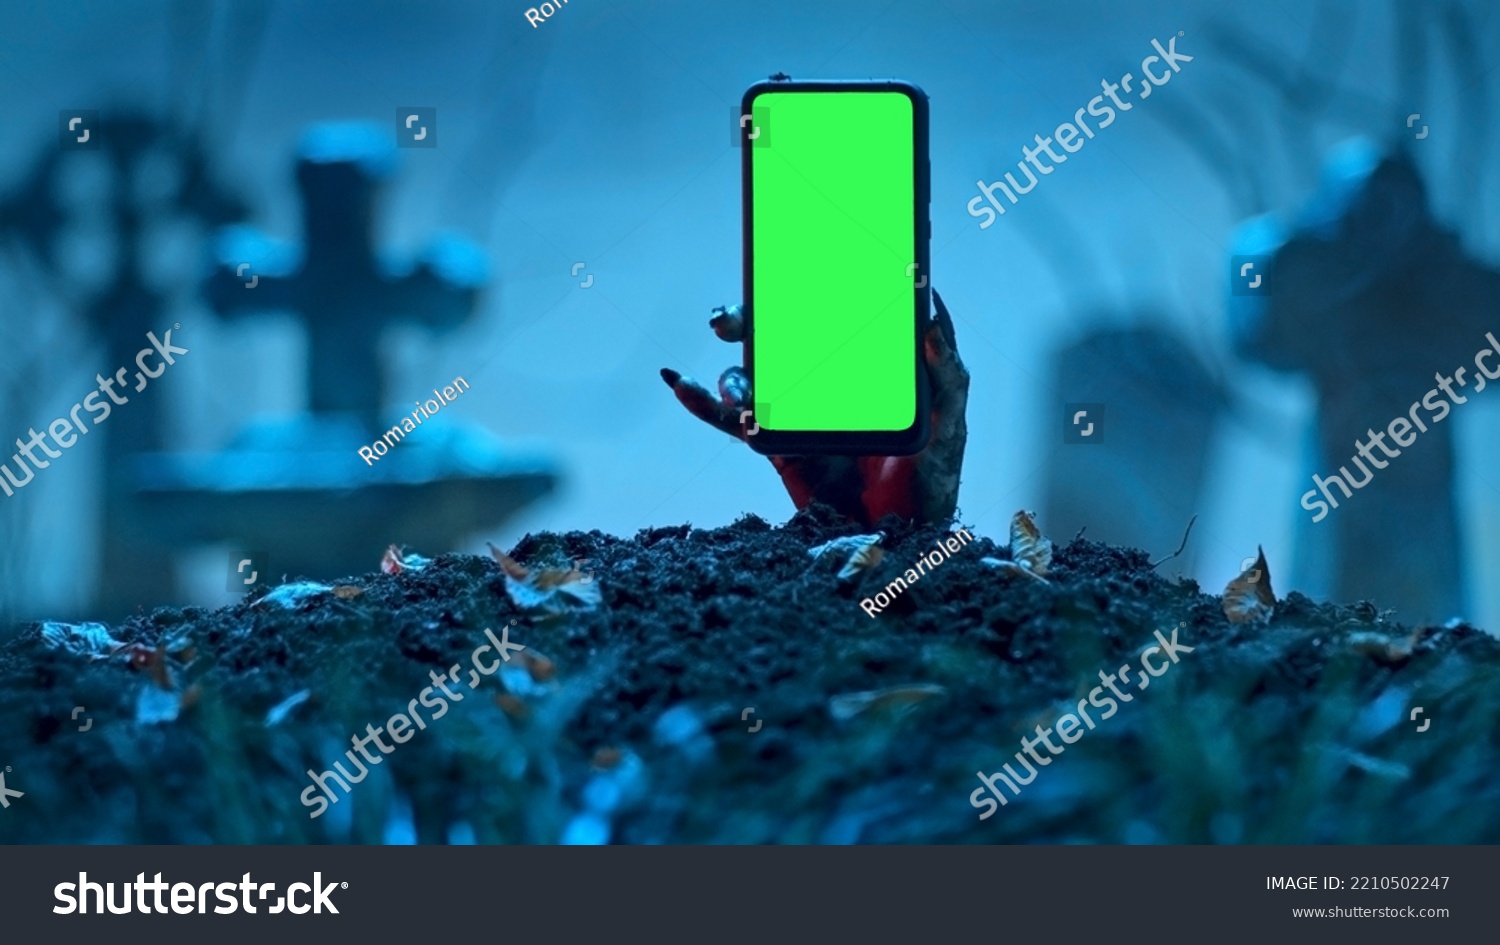 Zombie hand rising up smartphone with green screen out of grave. Holiday event halloween concept. #2210502247